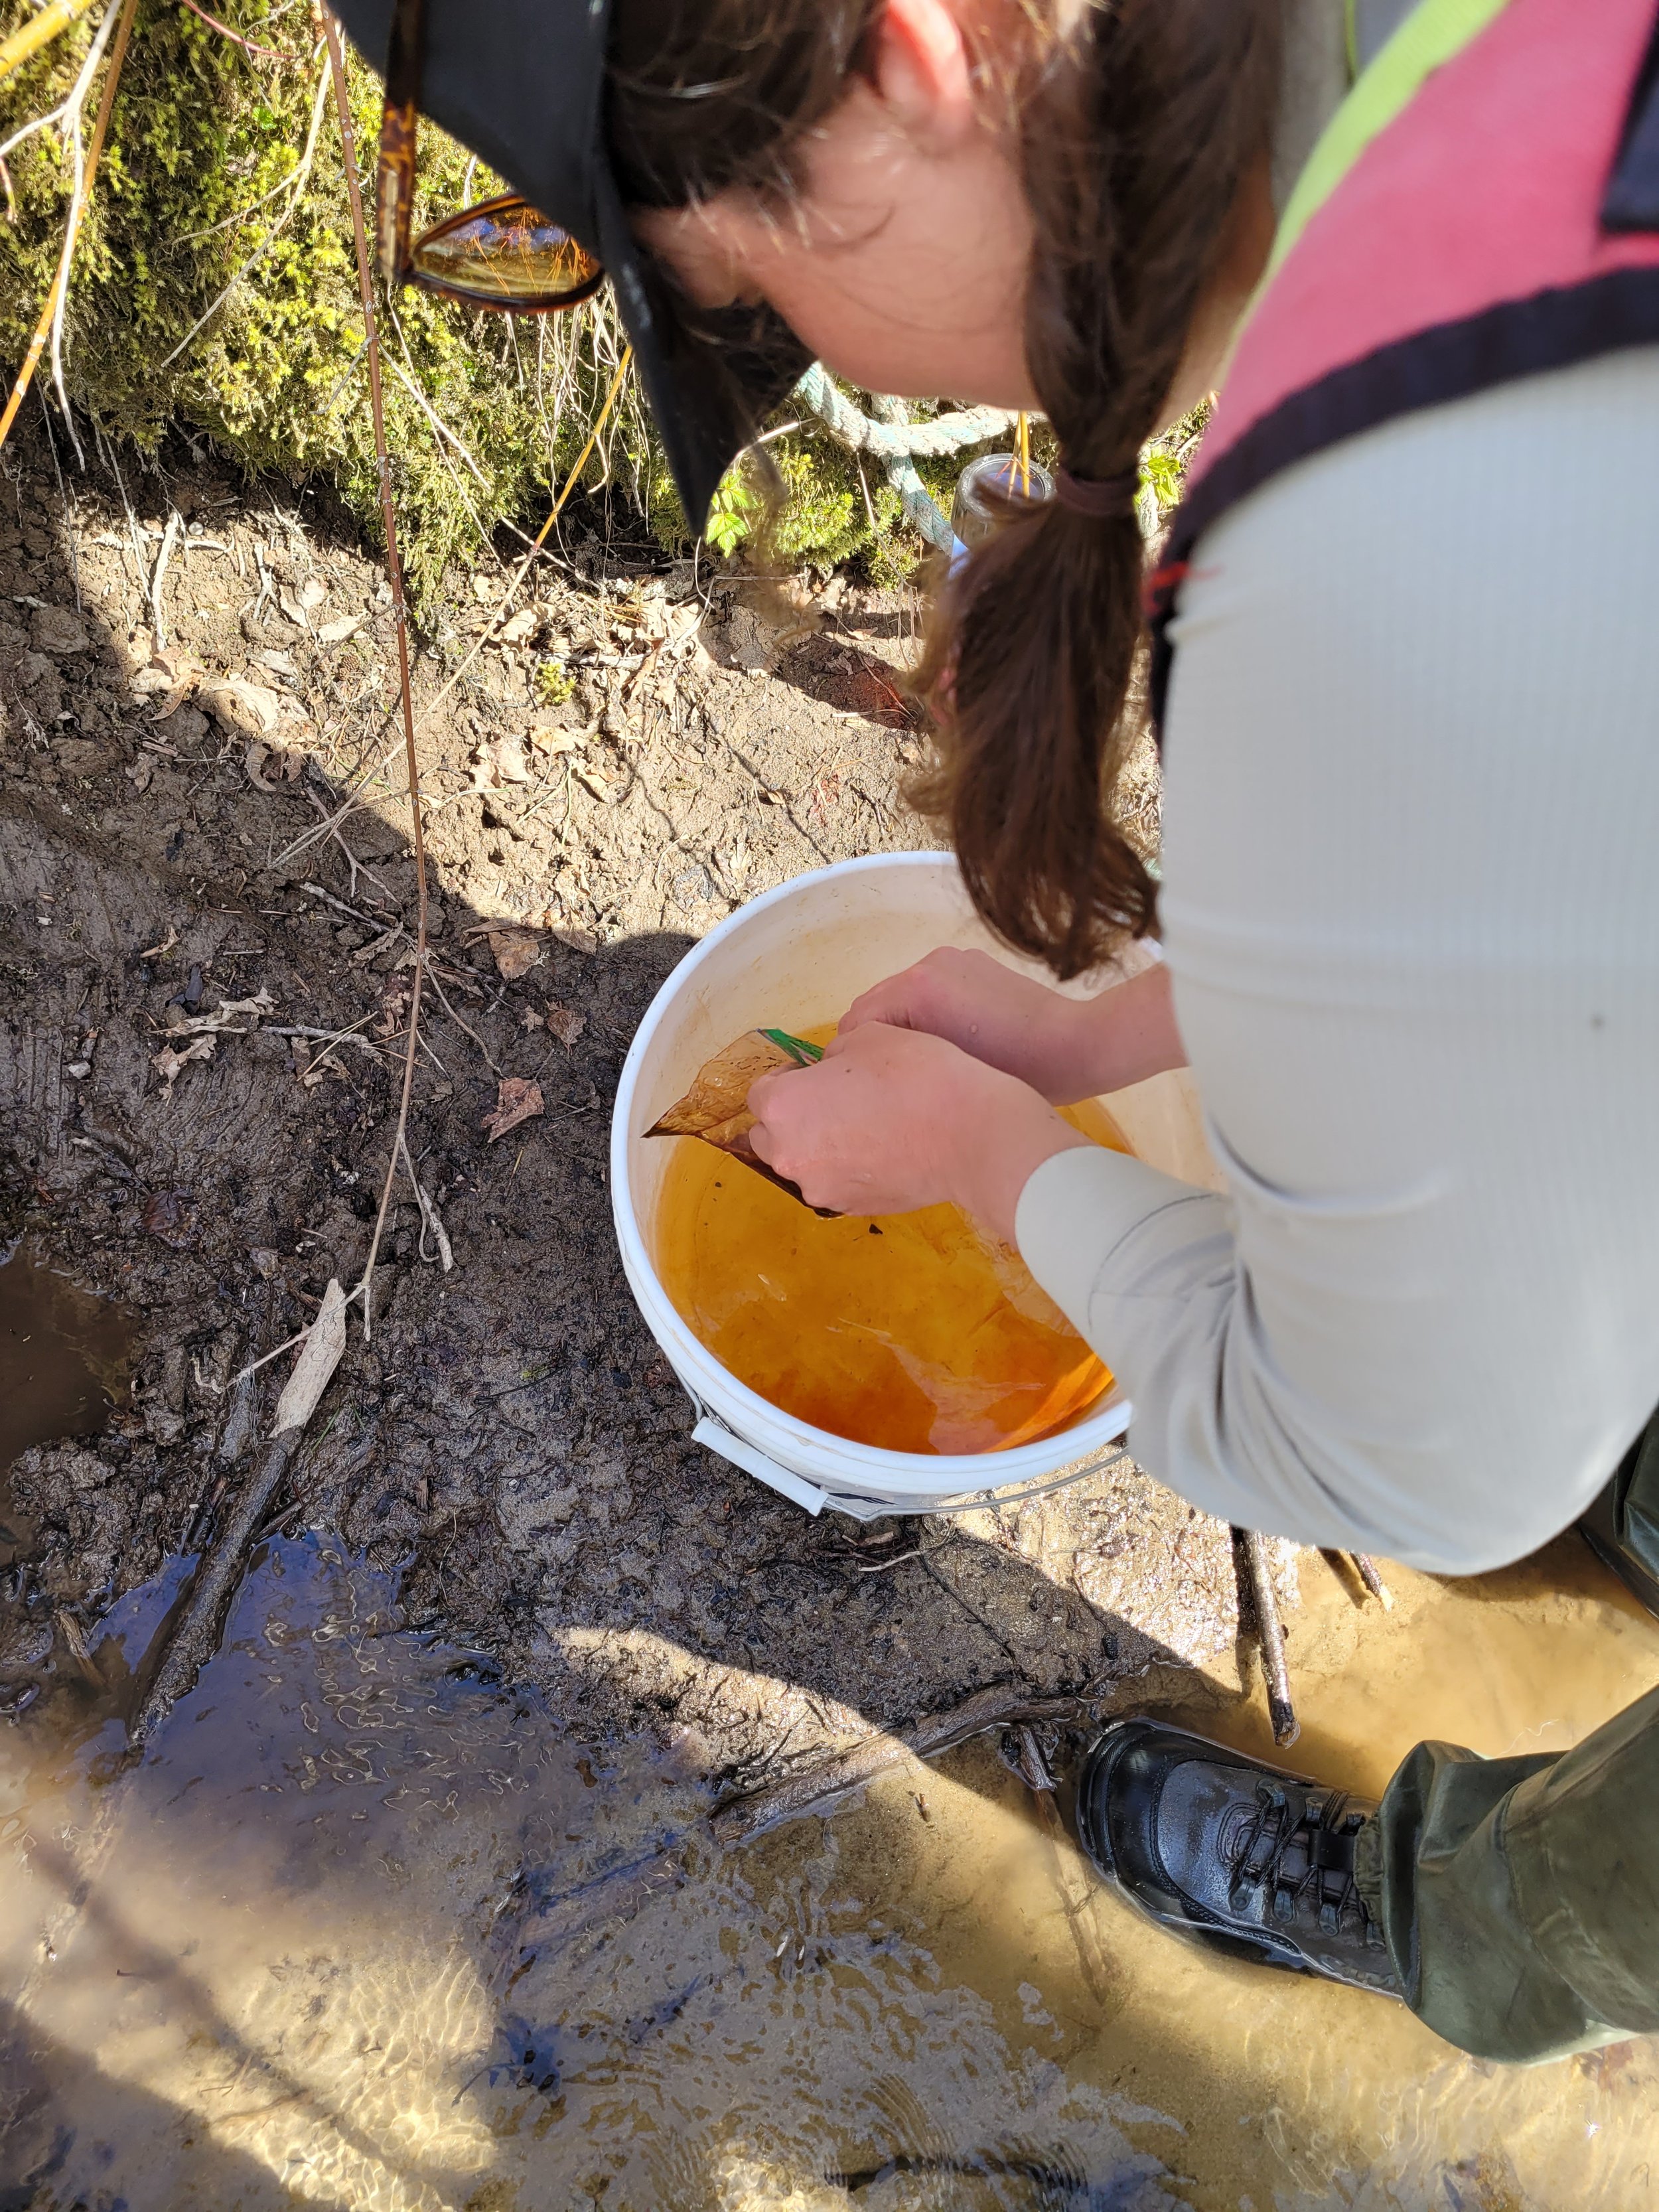 Adding dye to bucket for a mark-recapture study